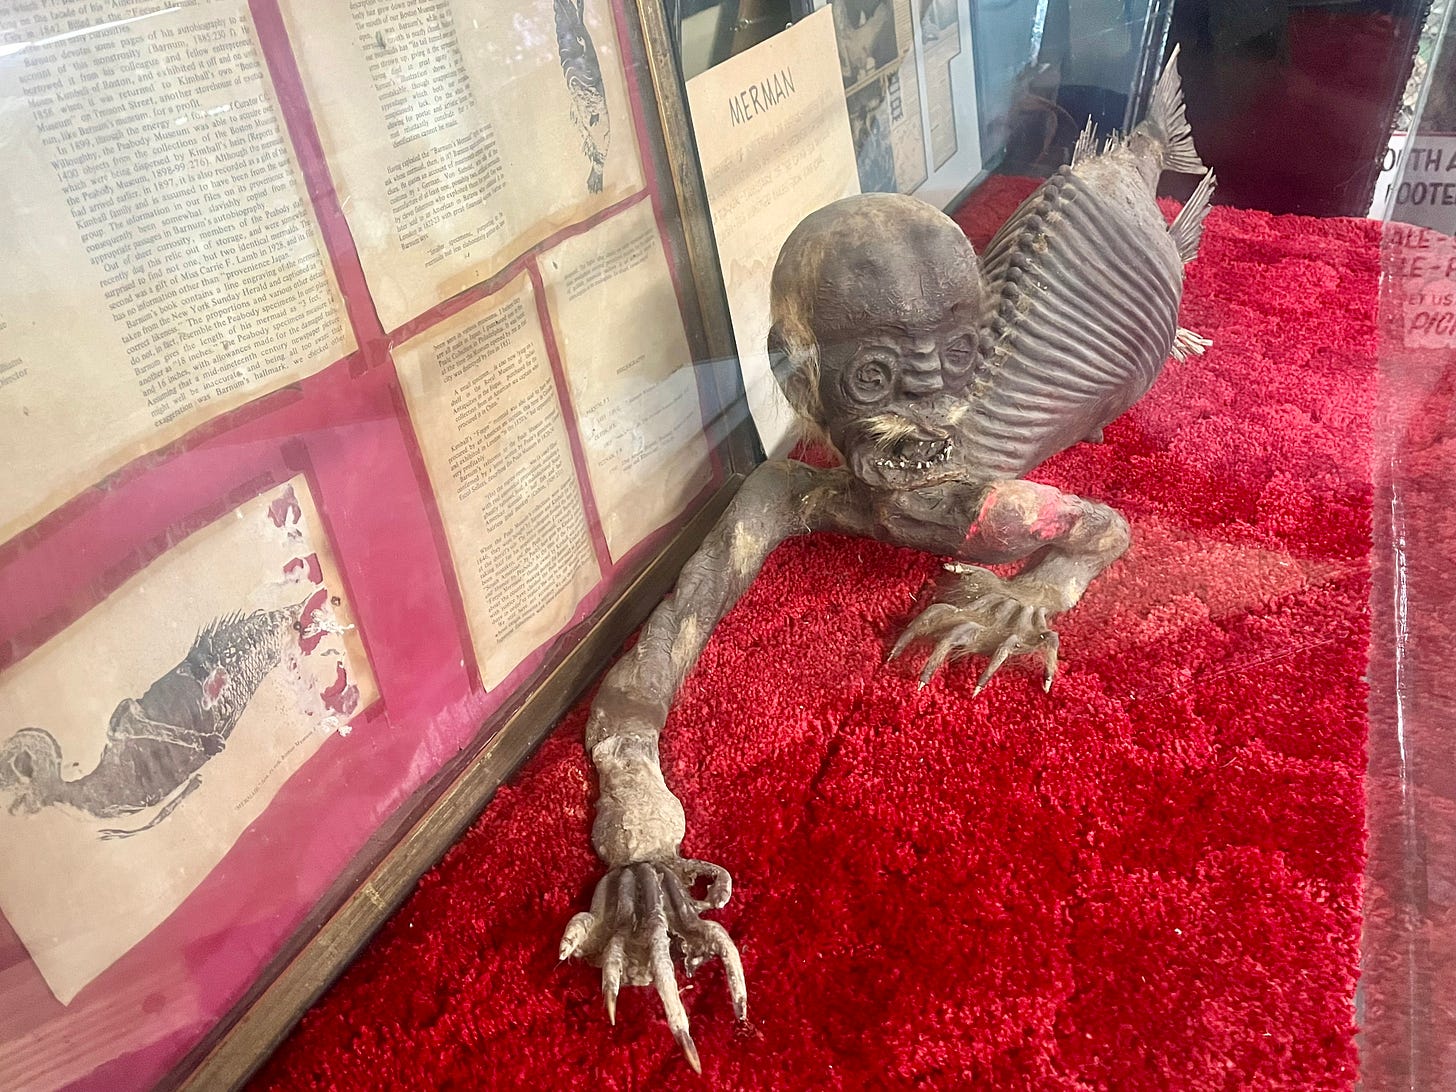 A "merman" skeleton in a glass display with a red carpet and a wall of old papers.